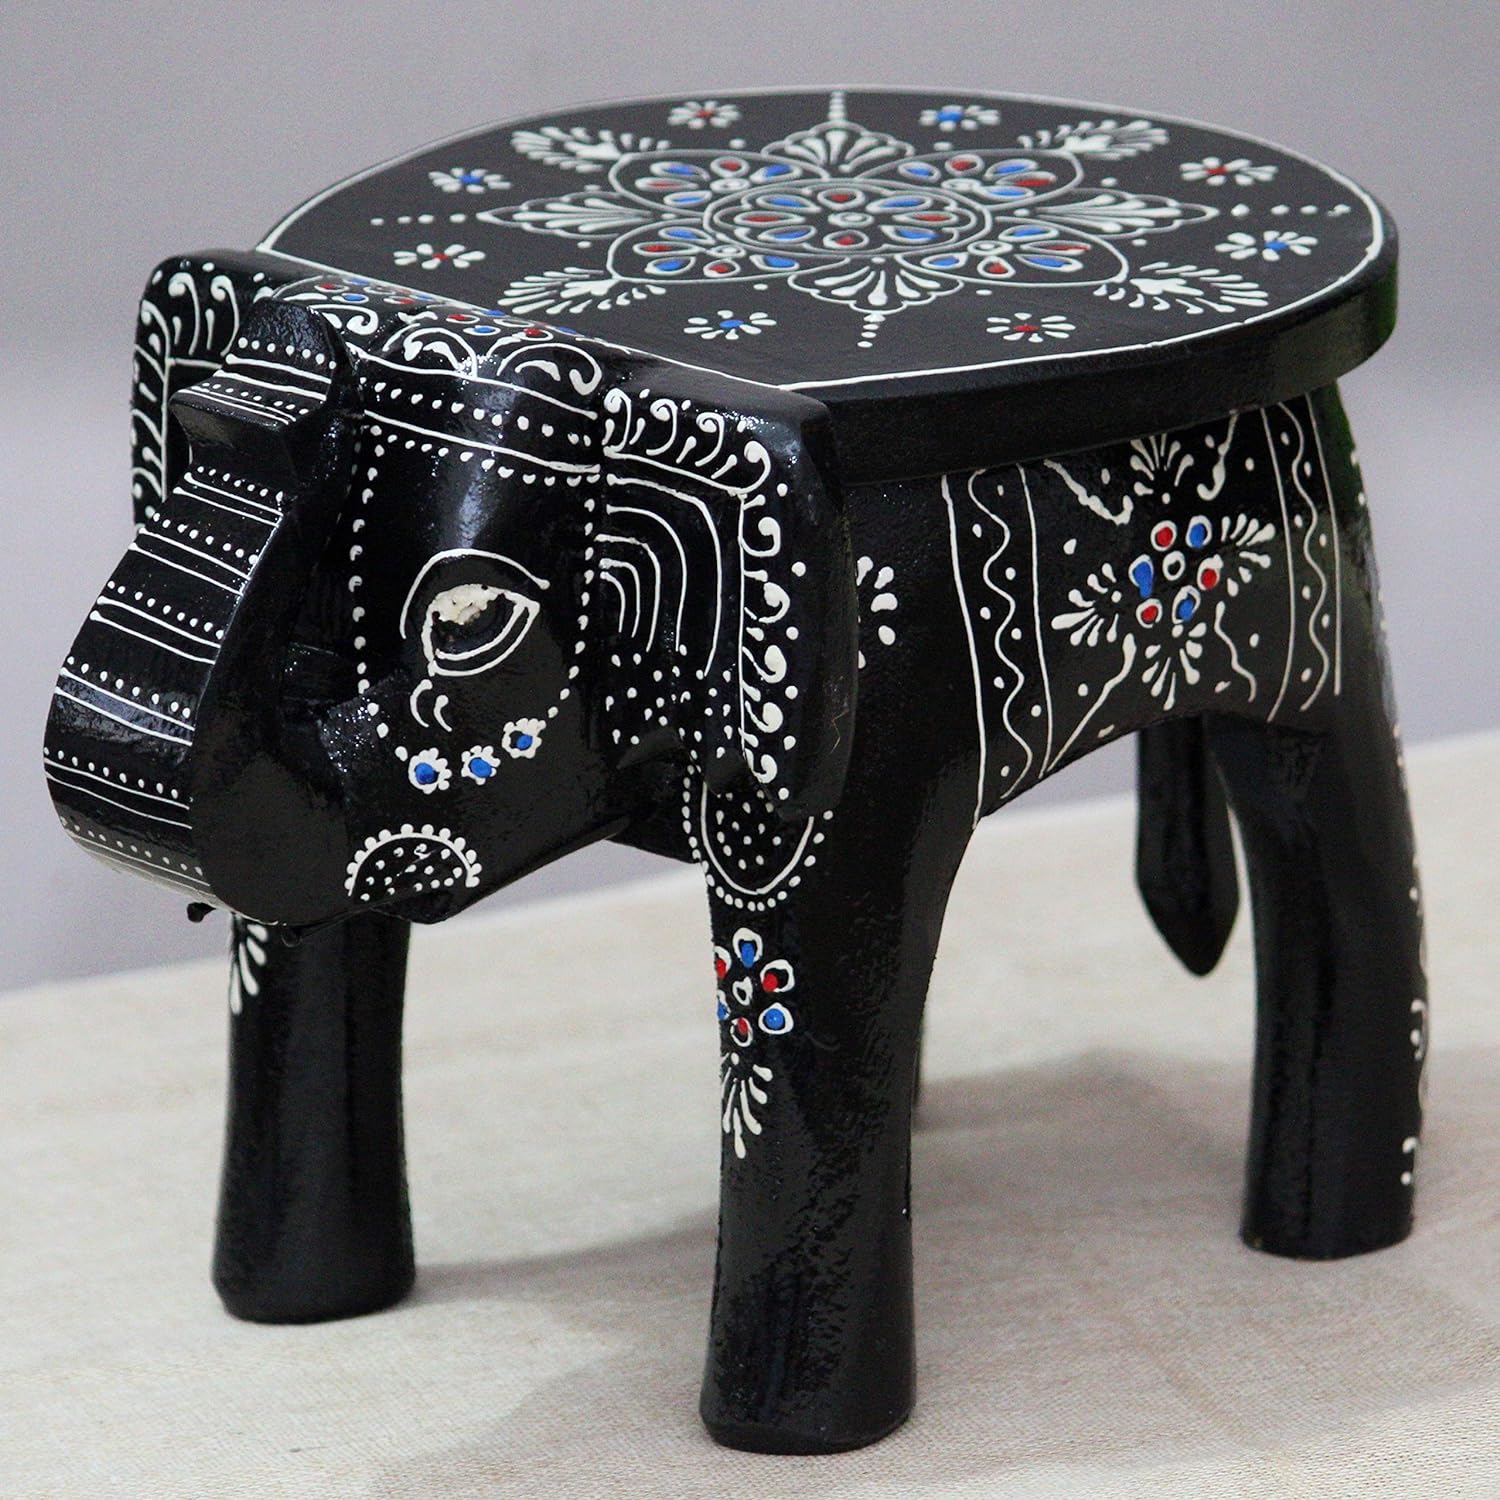 Hand-Painted Colorful Wooden Elephant Stool